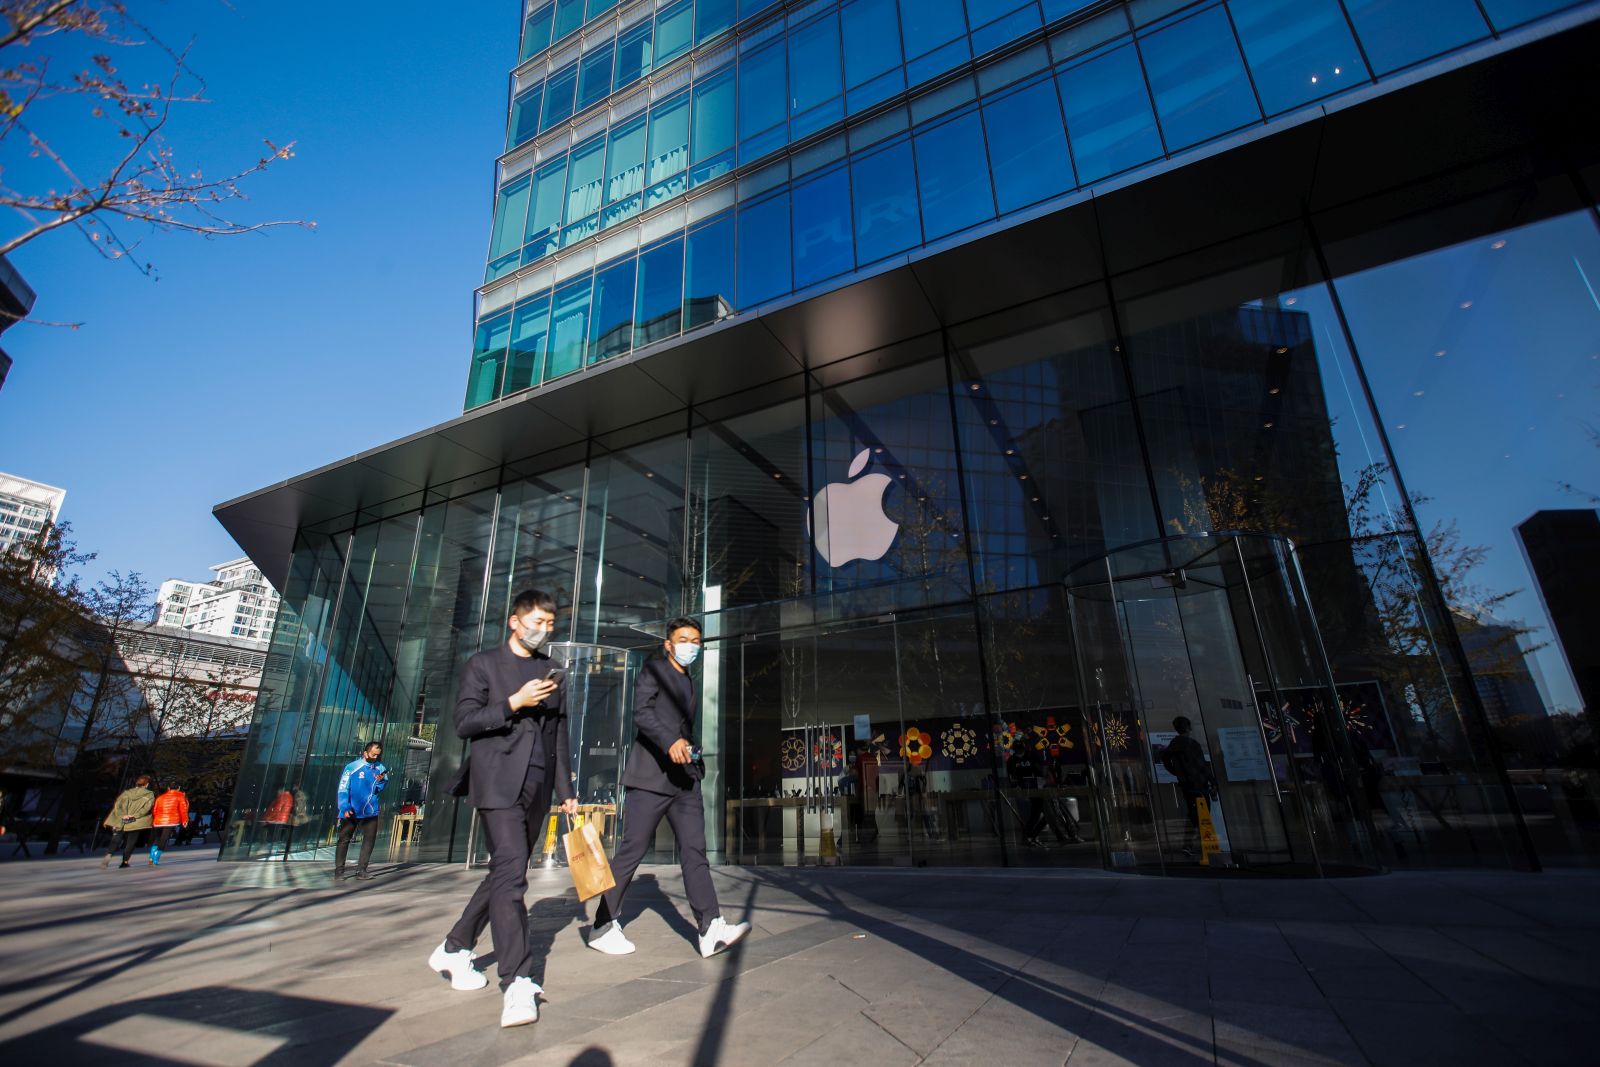 epa10291970 People wearing face masks walk past an Apple store at a mall in Beijing, China, 07 November 2022. China's Foxconn iPhone facotry in Zhengzhou was working to resume its production that had been hit by COVID-19 curbs, according to a company statement released on 07 November.  EPA/WU HAO